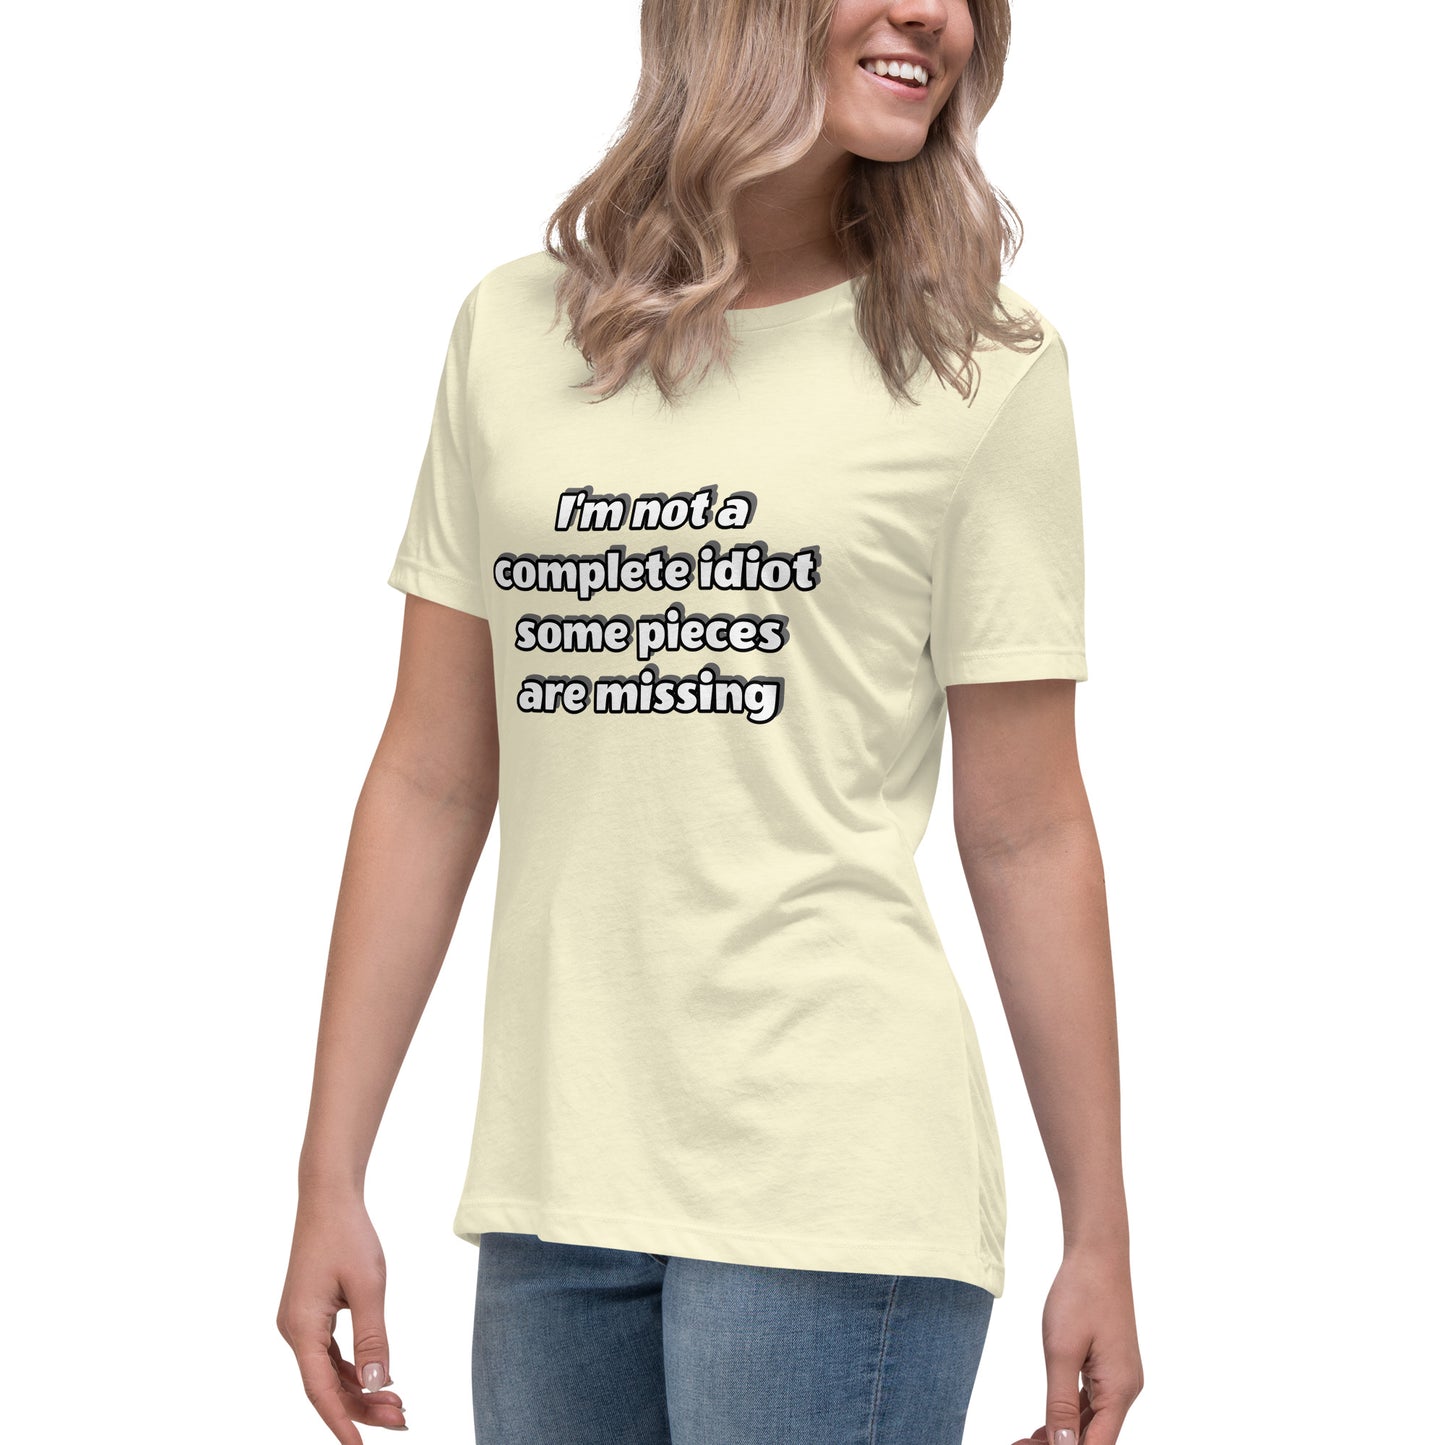 Women with citron yellow t-shirt with text “I’m not a complete idiot, some pieces are missing”